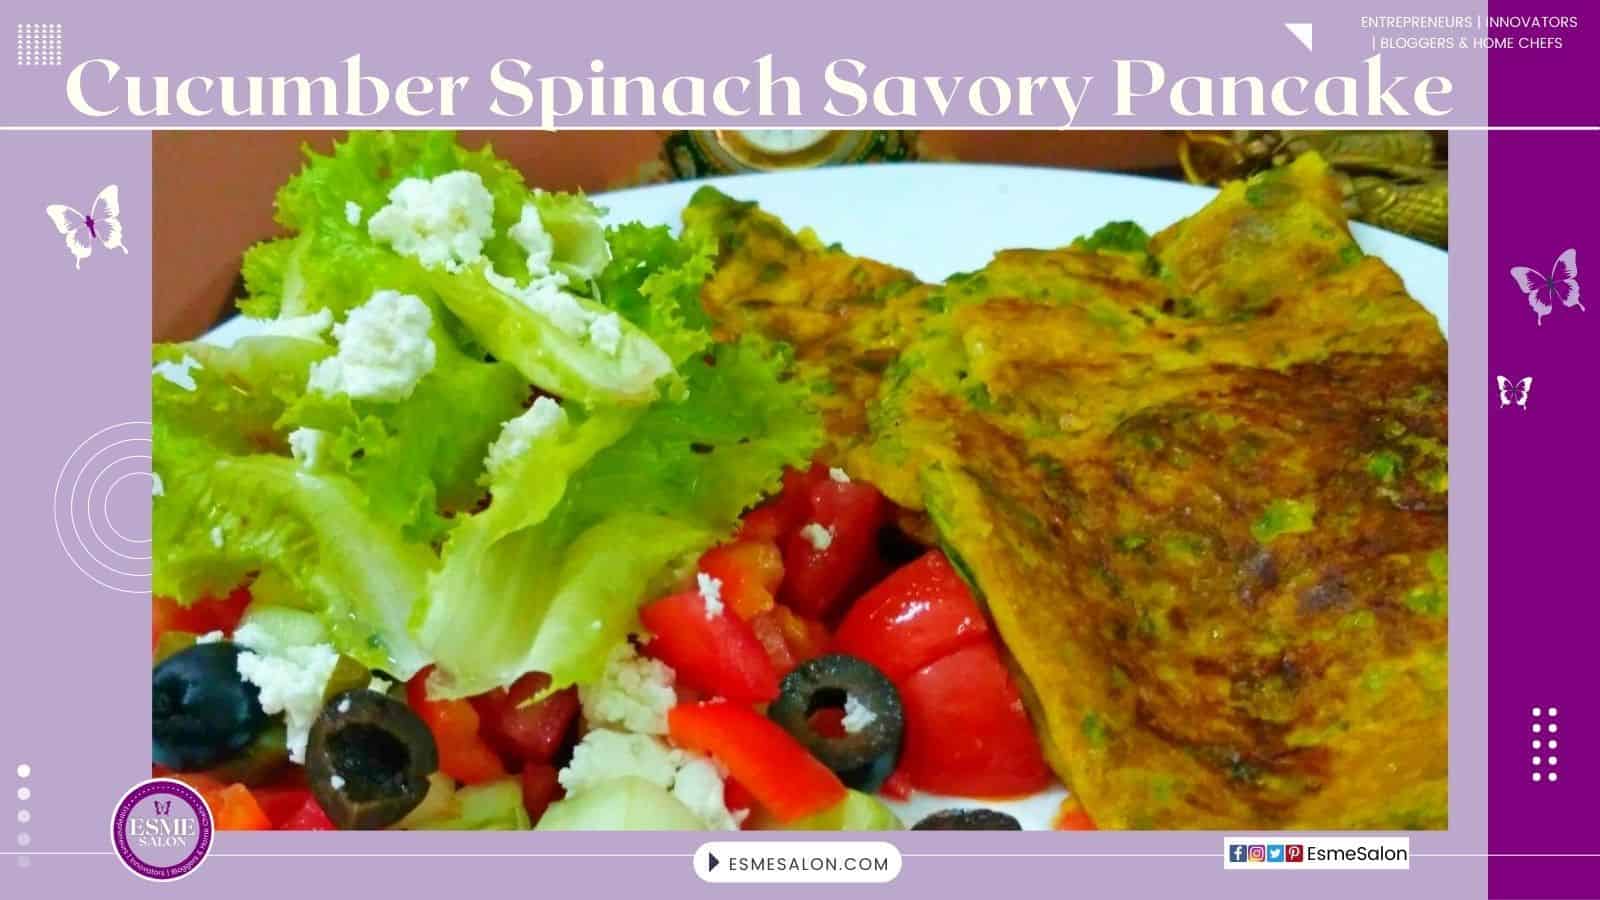 an imnage with Cucumber Spinach Savory Pancake plated with a Greek Salad on the side